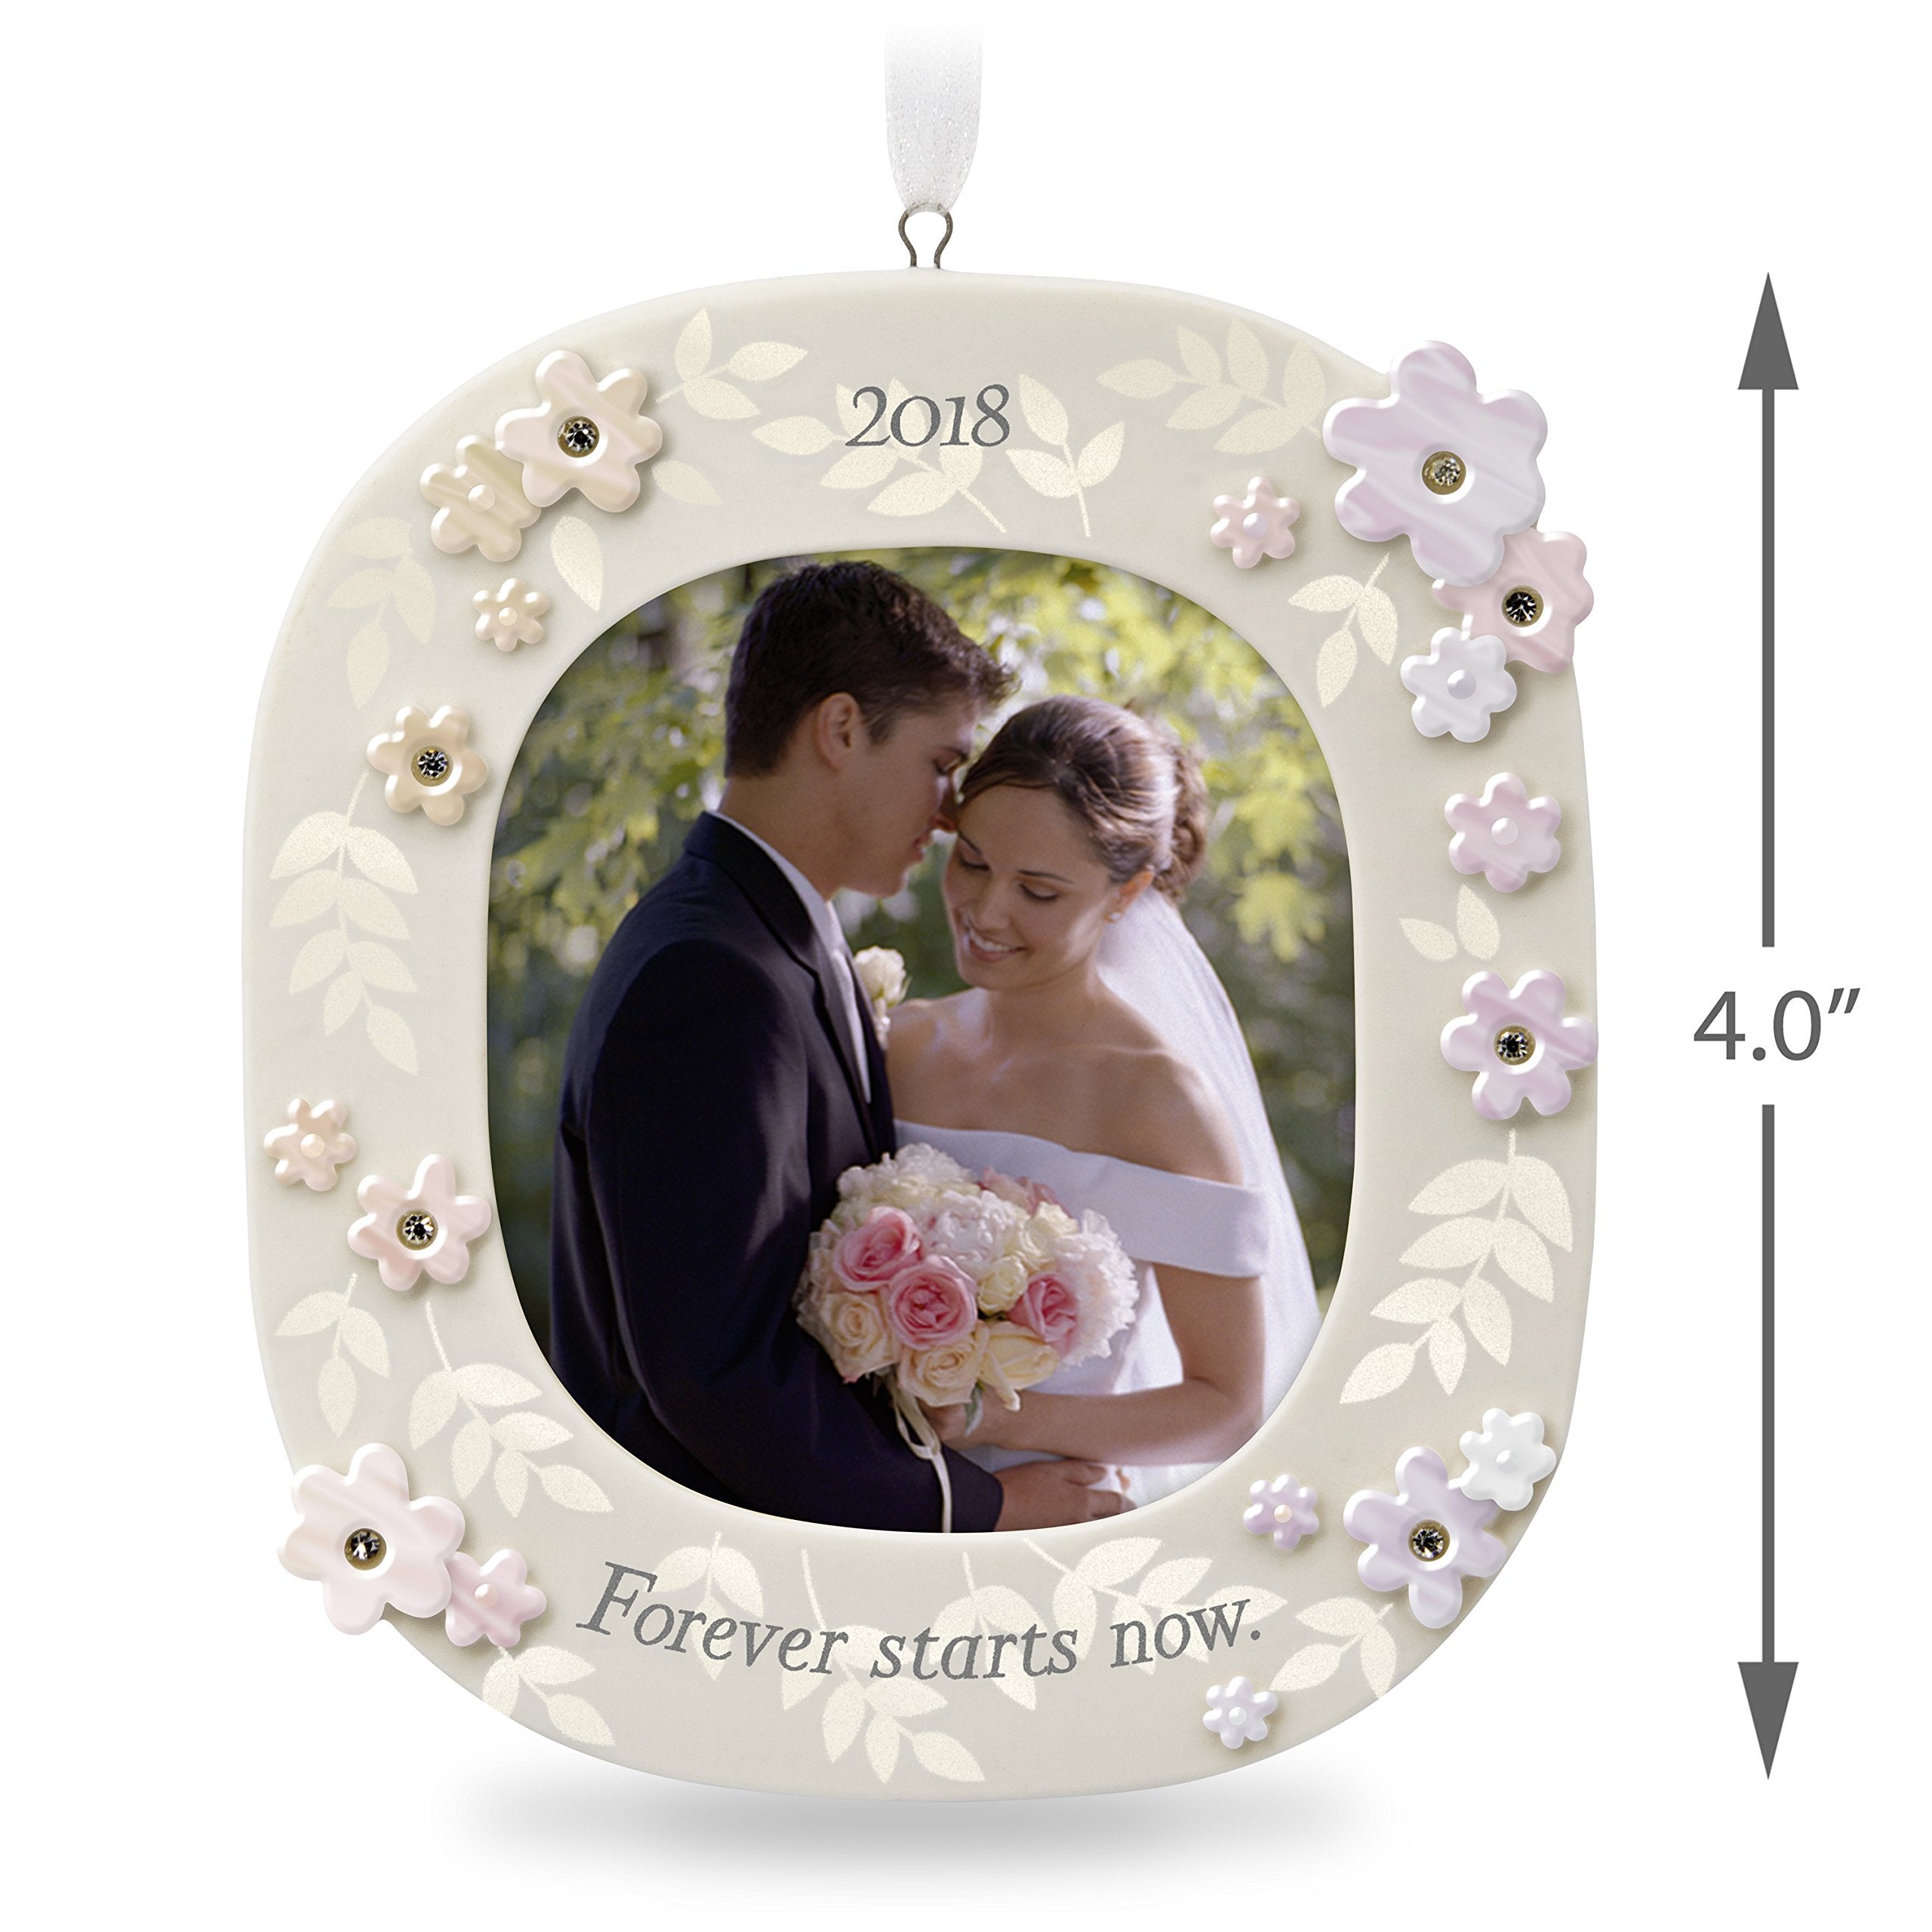 Hallmark Keepsake 2018 Wedding Gift Forever Starts Now Year Dated Porcelain Photo Picture Frame Christmas Ornament